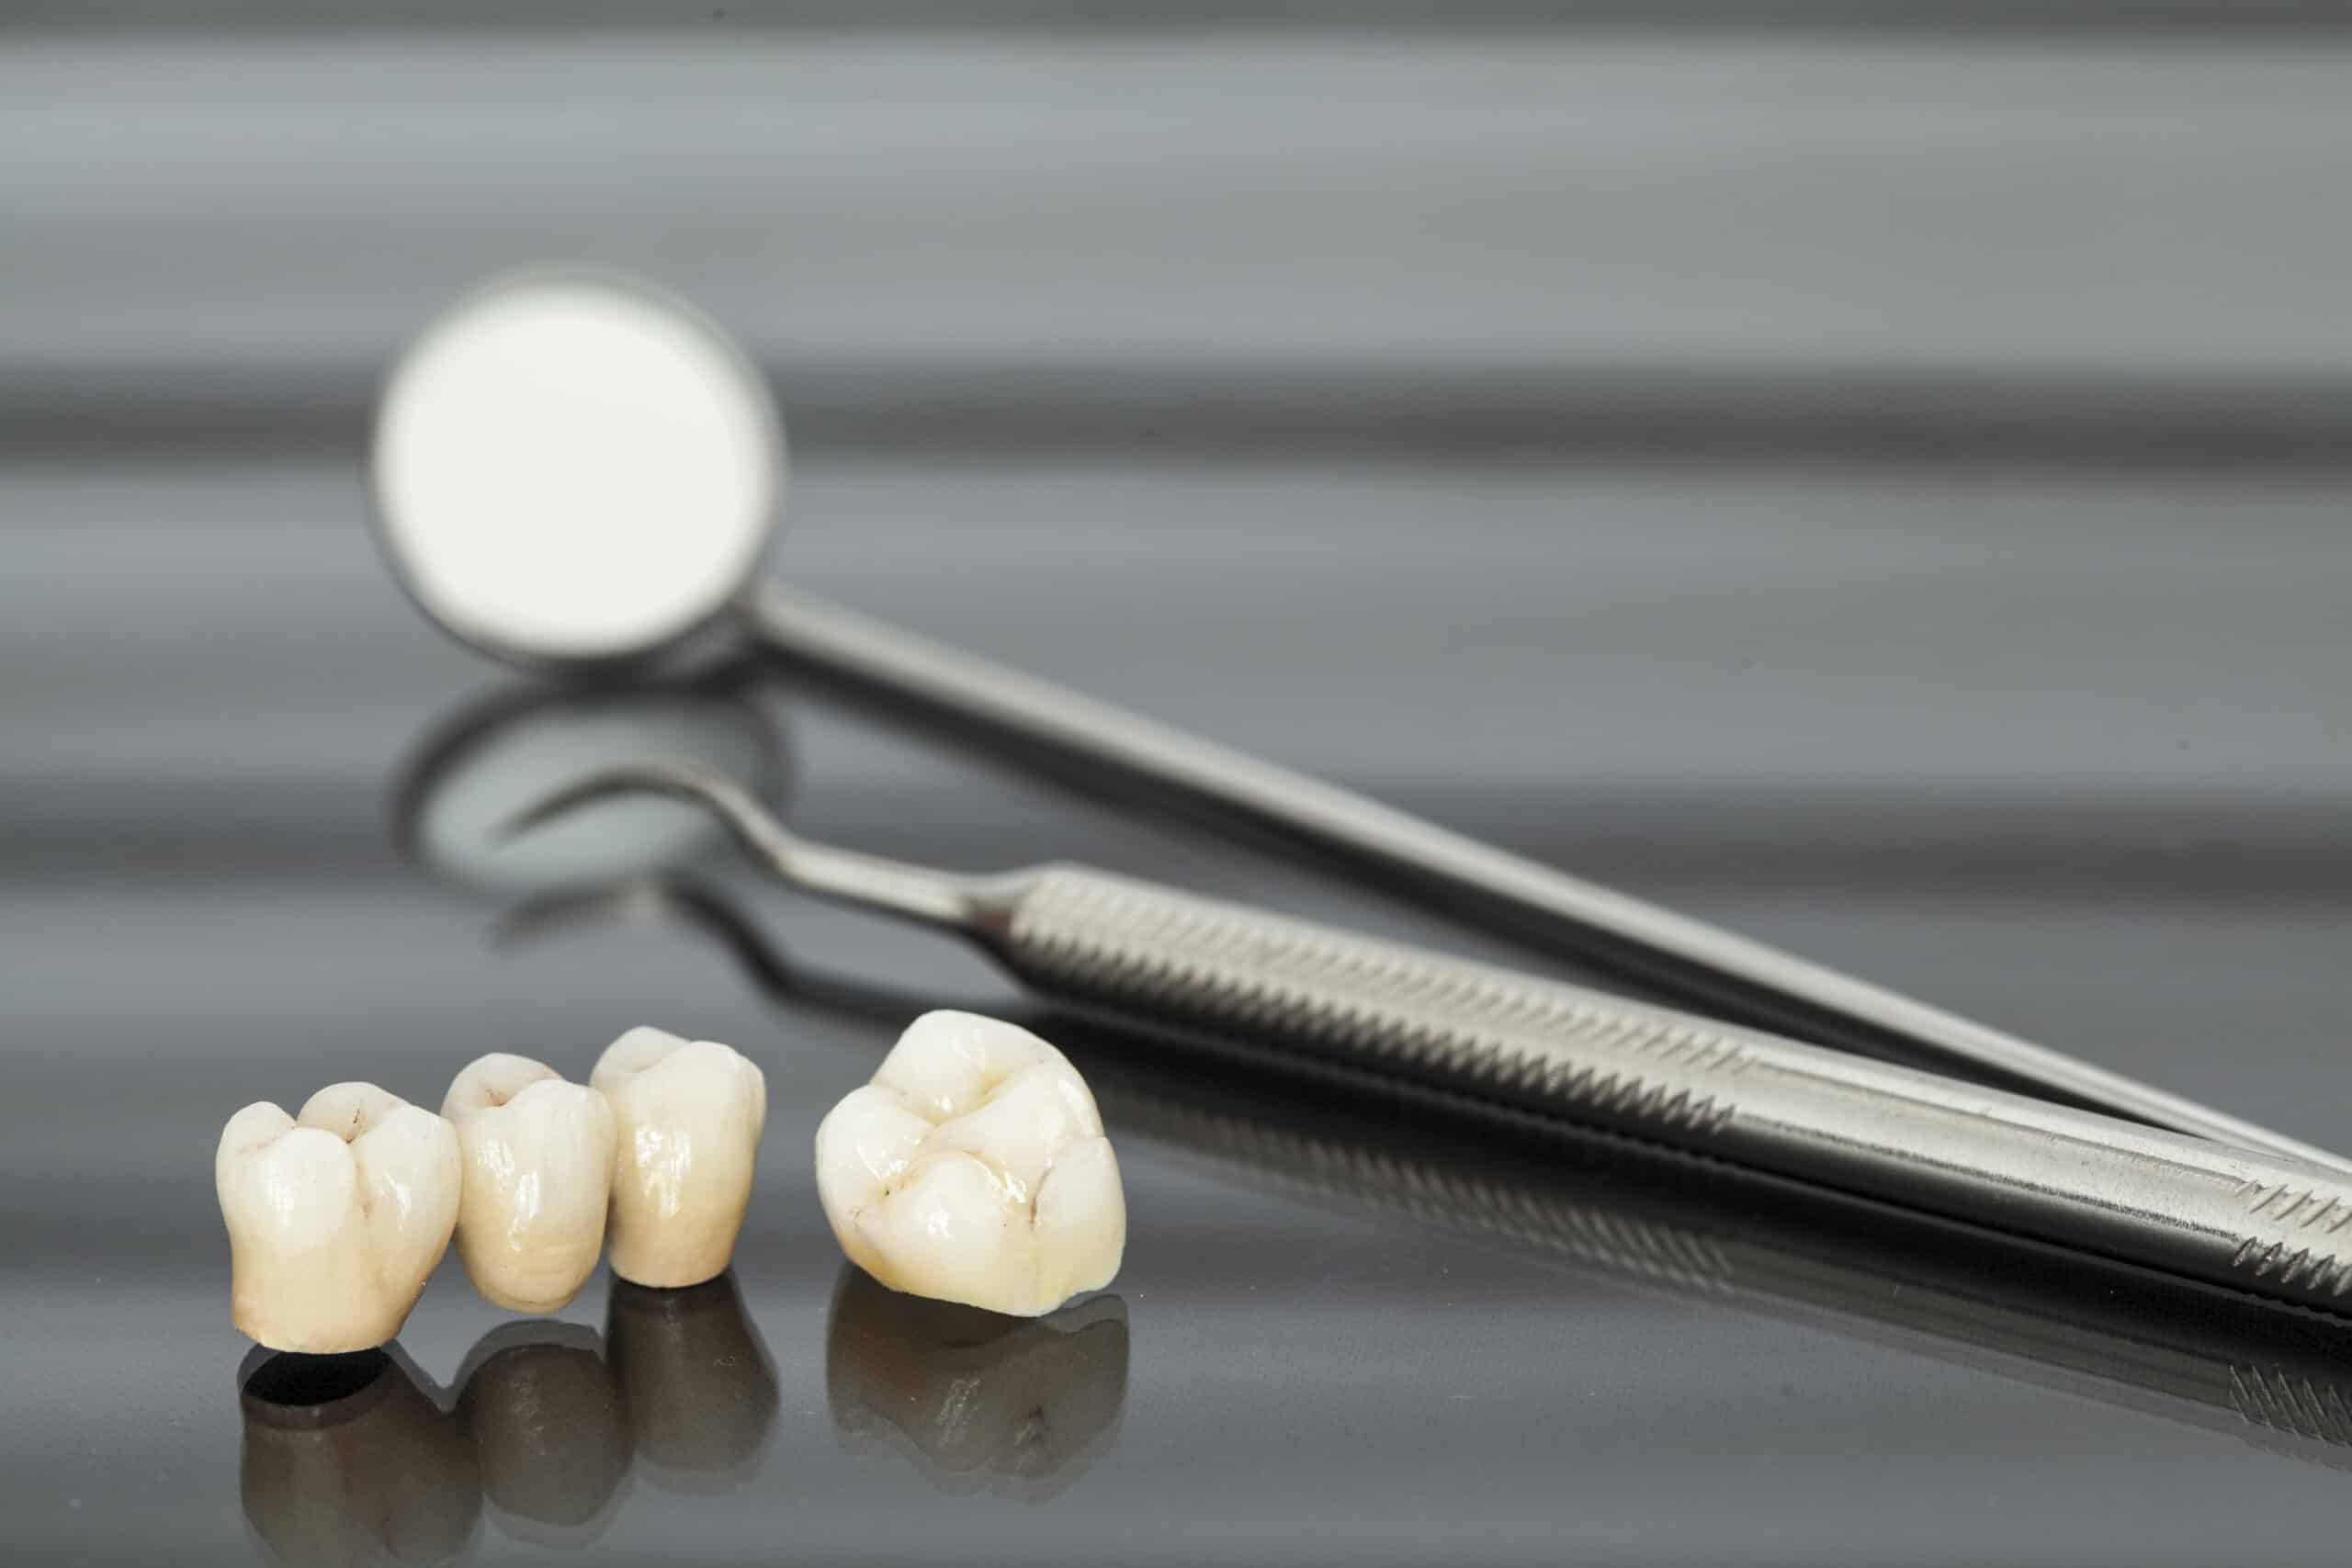 Catching Dental Crown Problems: The 6 Most Common Complications You May Experience